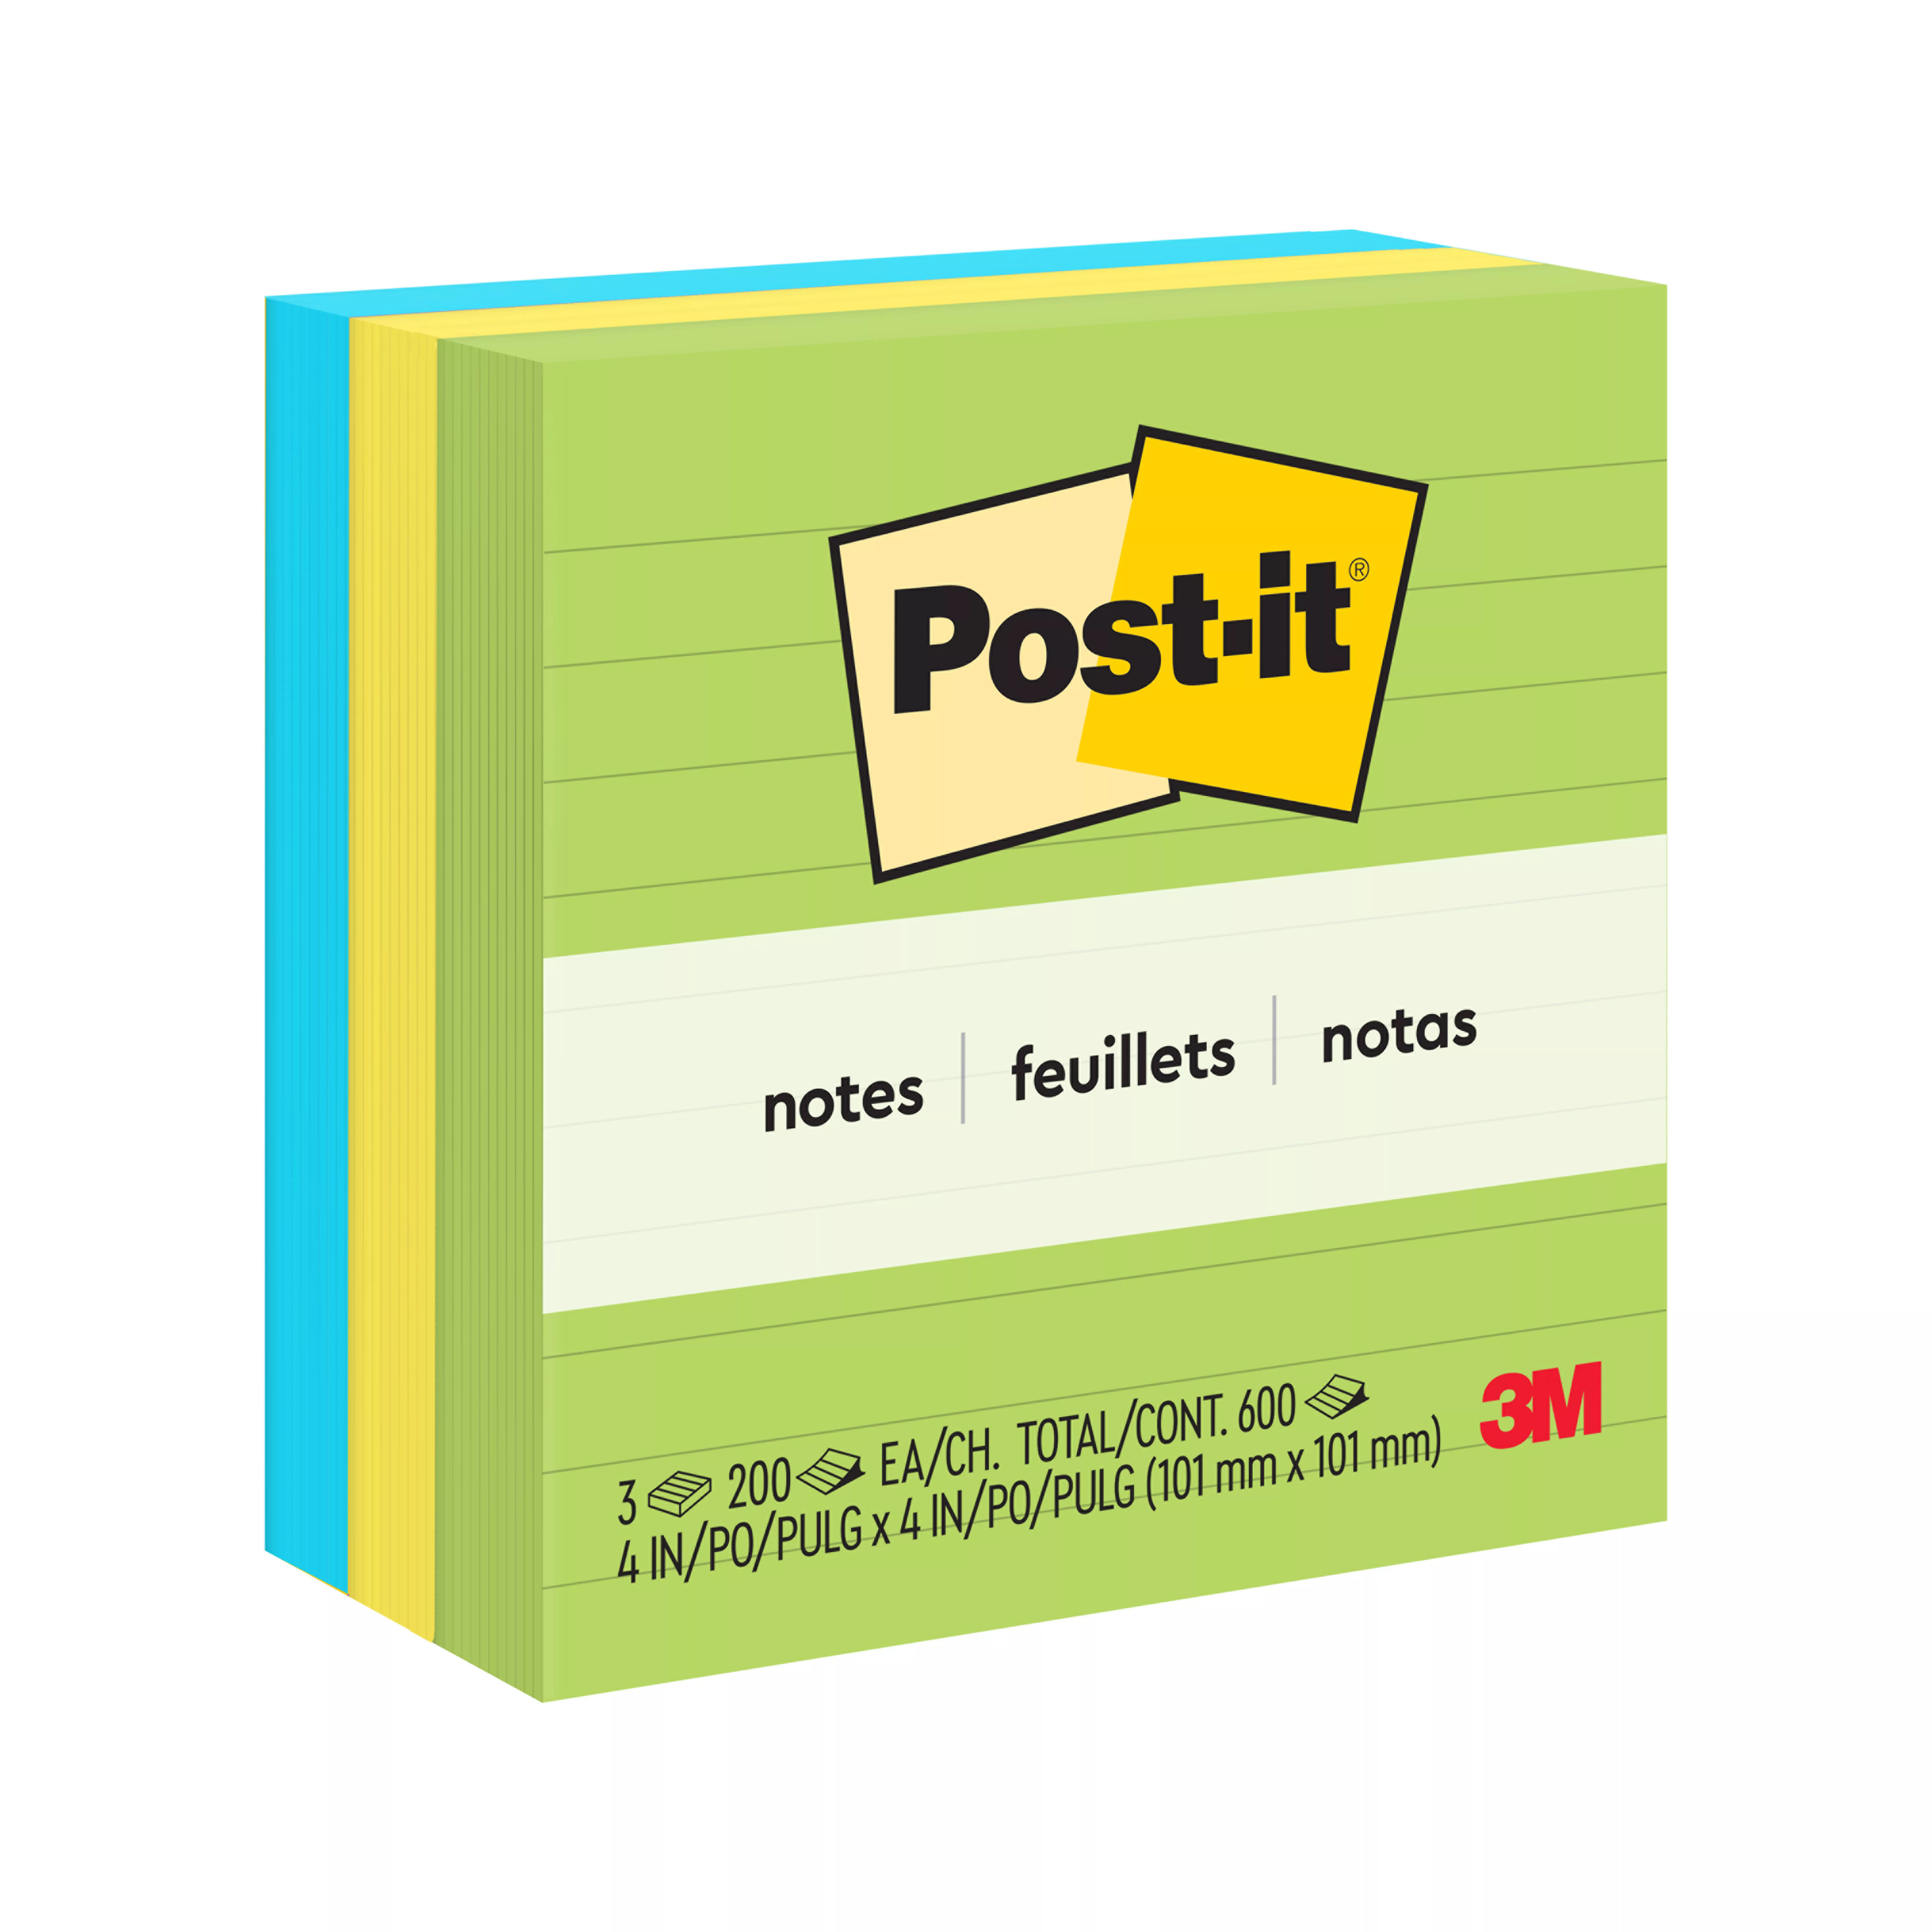 Post-it® Notes, 675-3AUL, 4 in x 4 in (101 mm x 101 mm) Jaipur colors. 3
pads, 200 sheets/pad